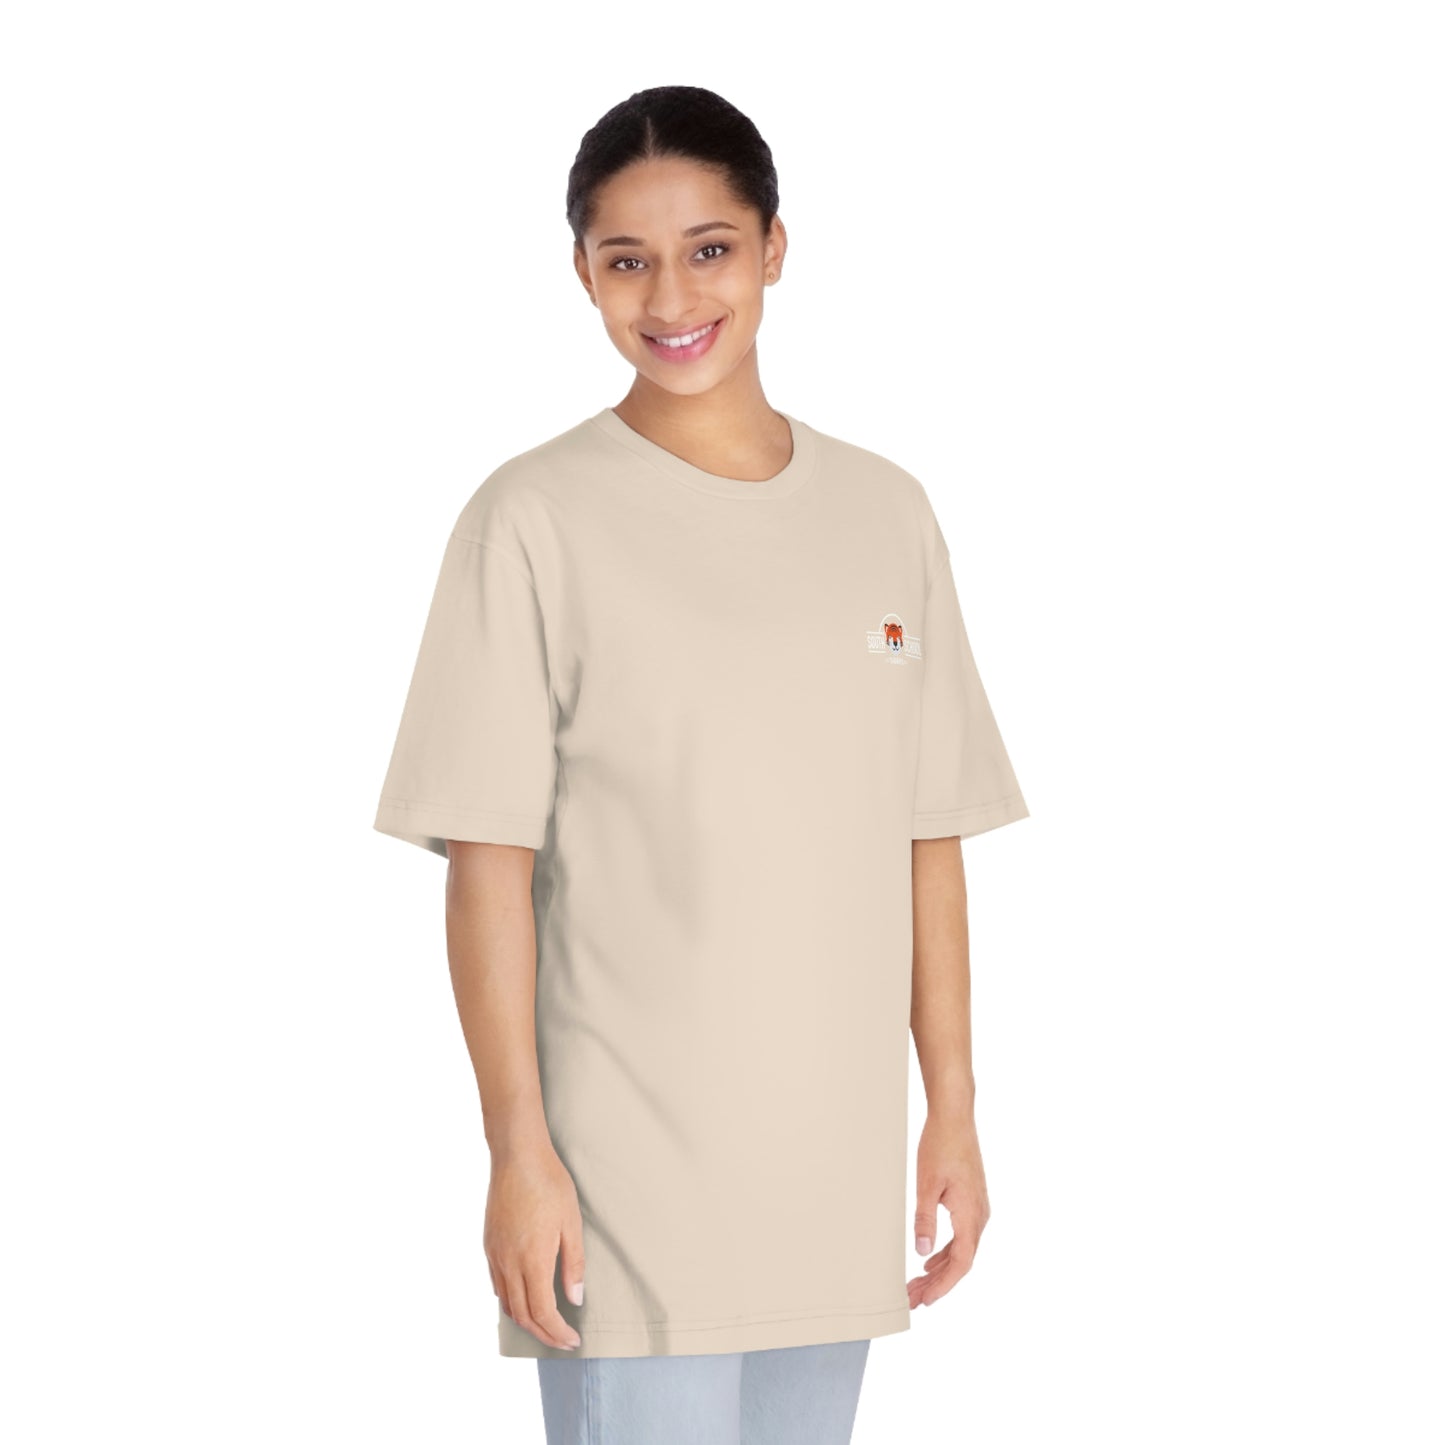 Adult American Apparel Adult Classic Crewneck T-Shirt, South Tiger Classic (Multiple Colors Available)